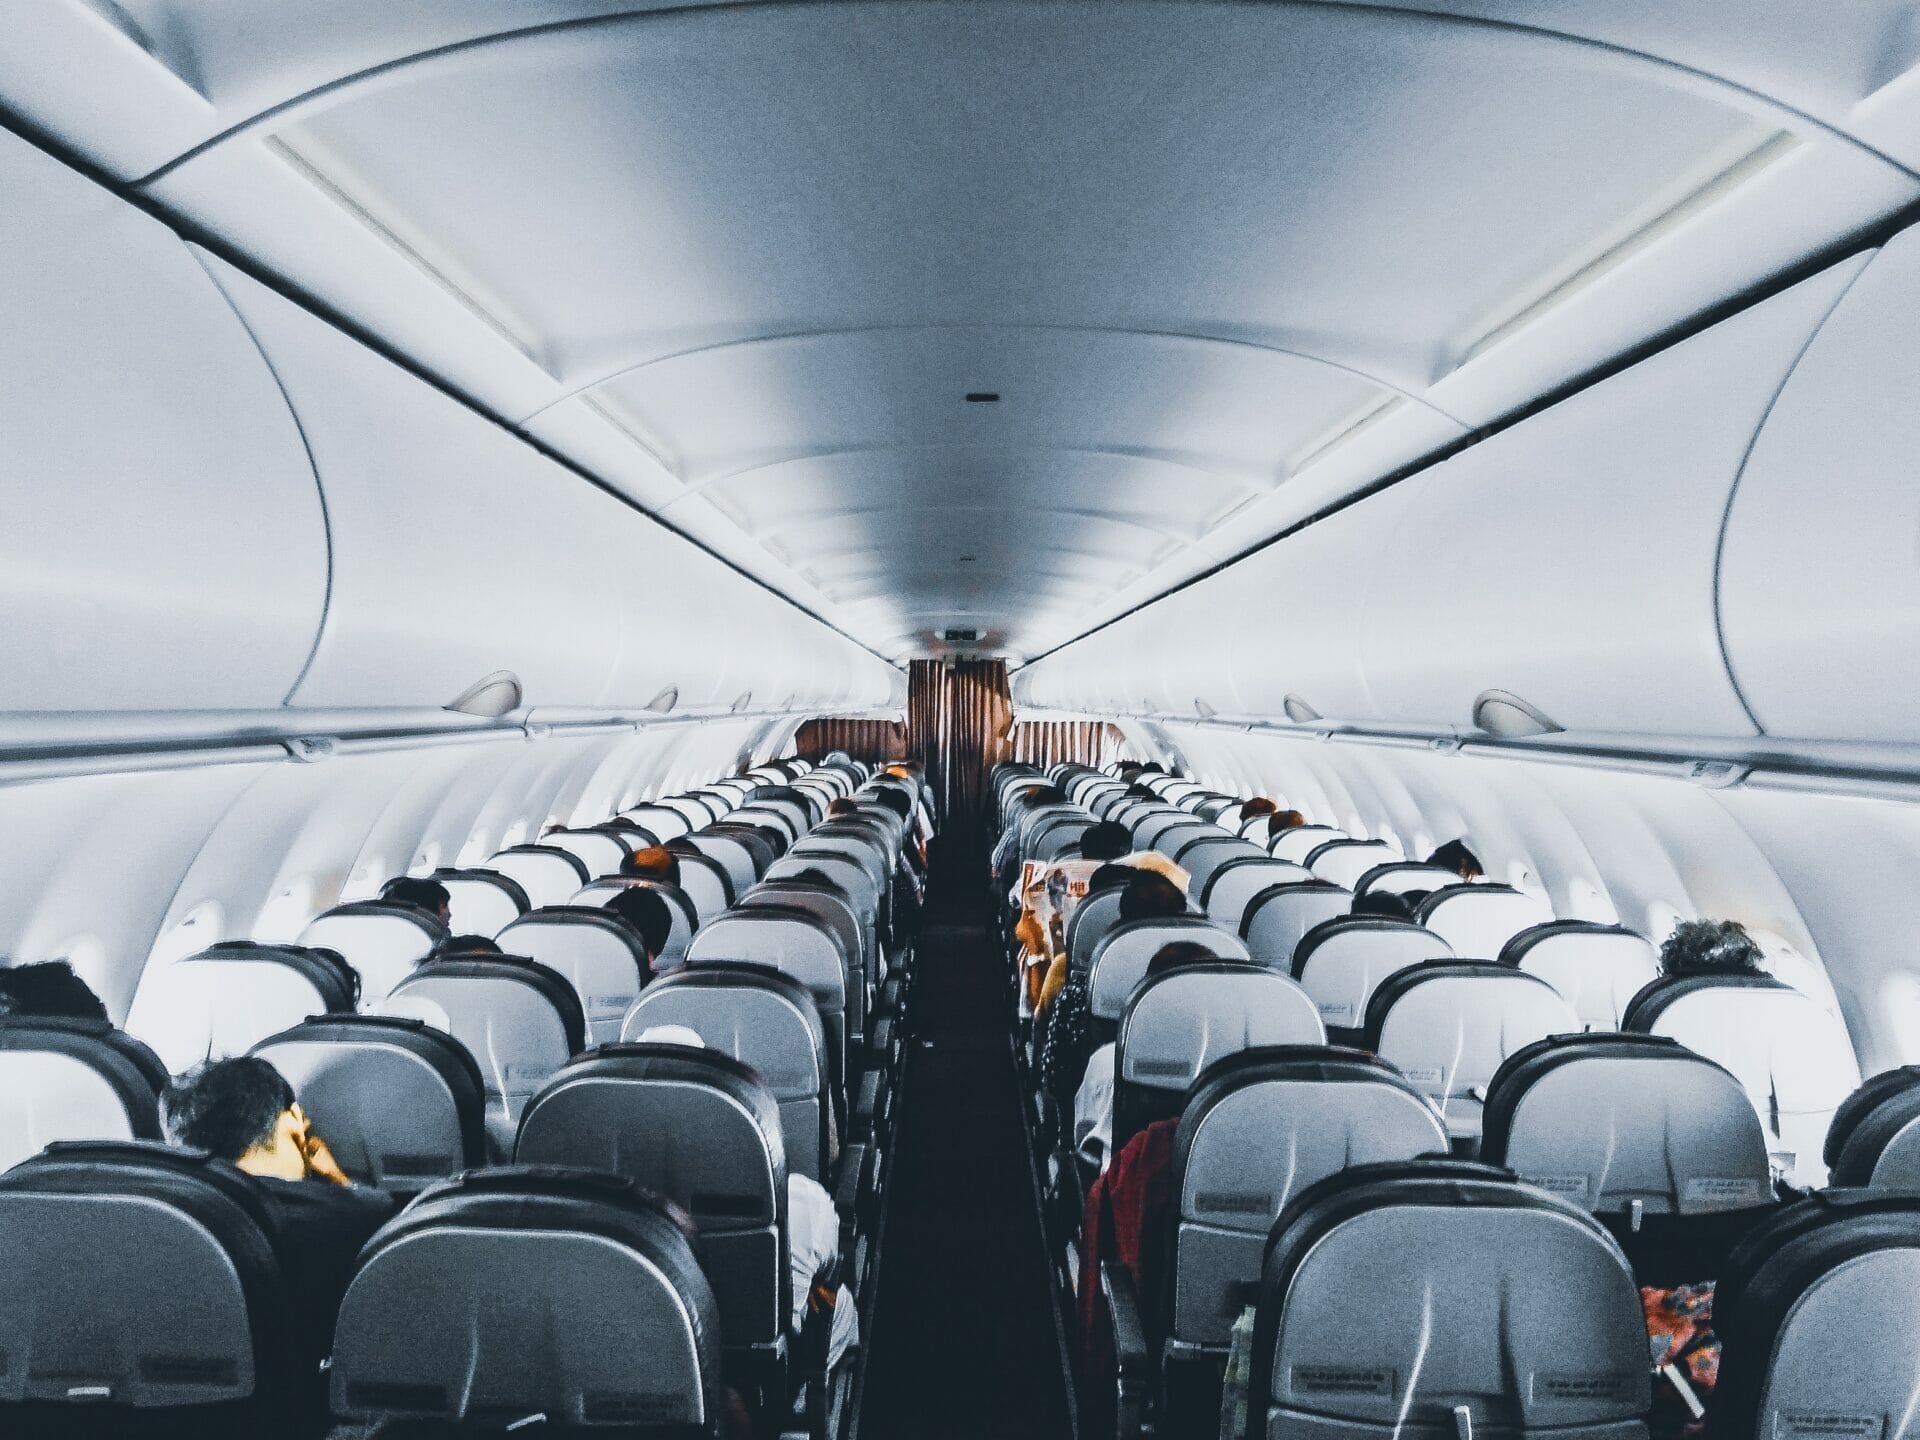 Inside of plane to represent air travel